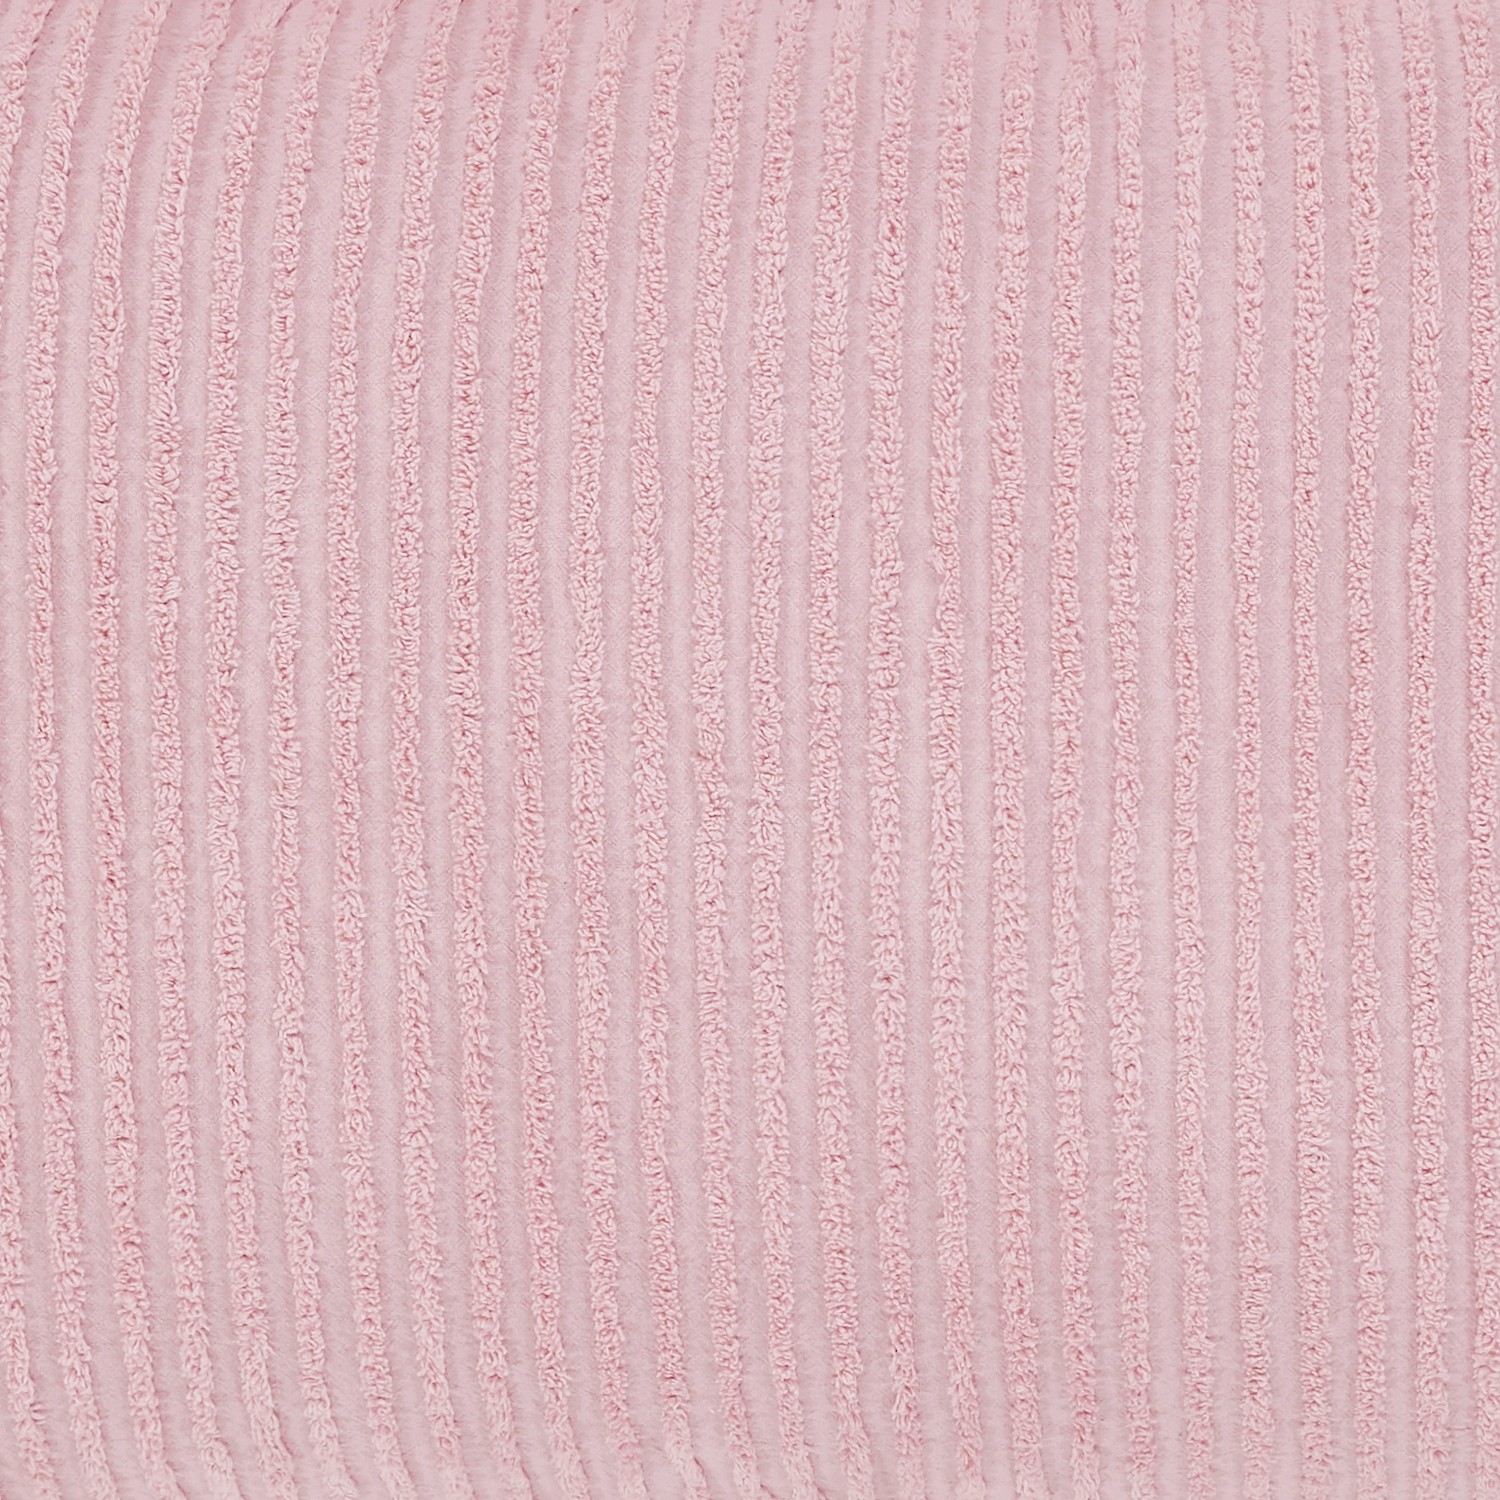 Better Trends Jullian Stripe Design 100% Cotton for All Ages  Full/Double Bedspread - Pink - image 4 of 6